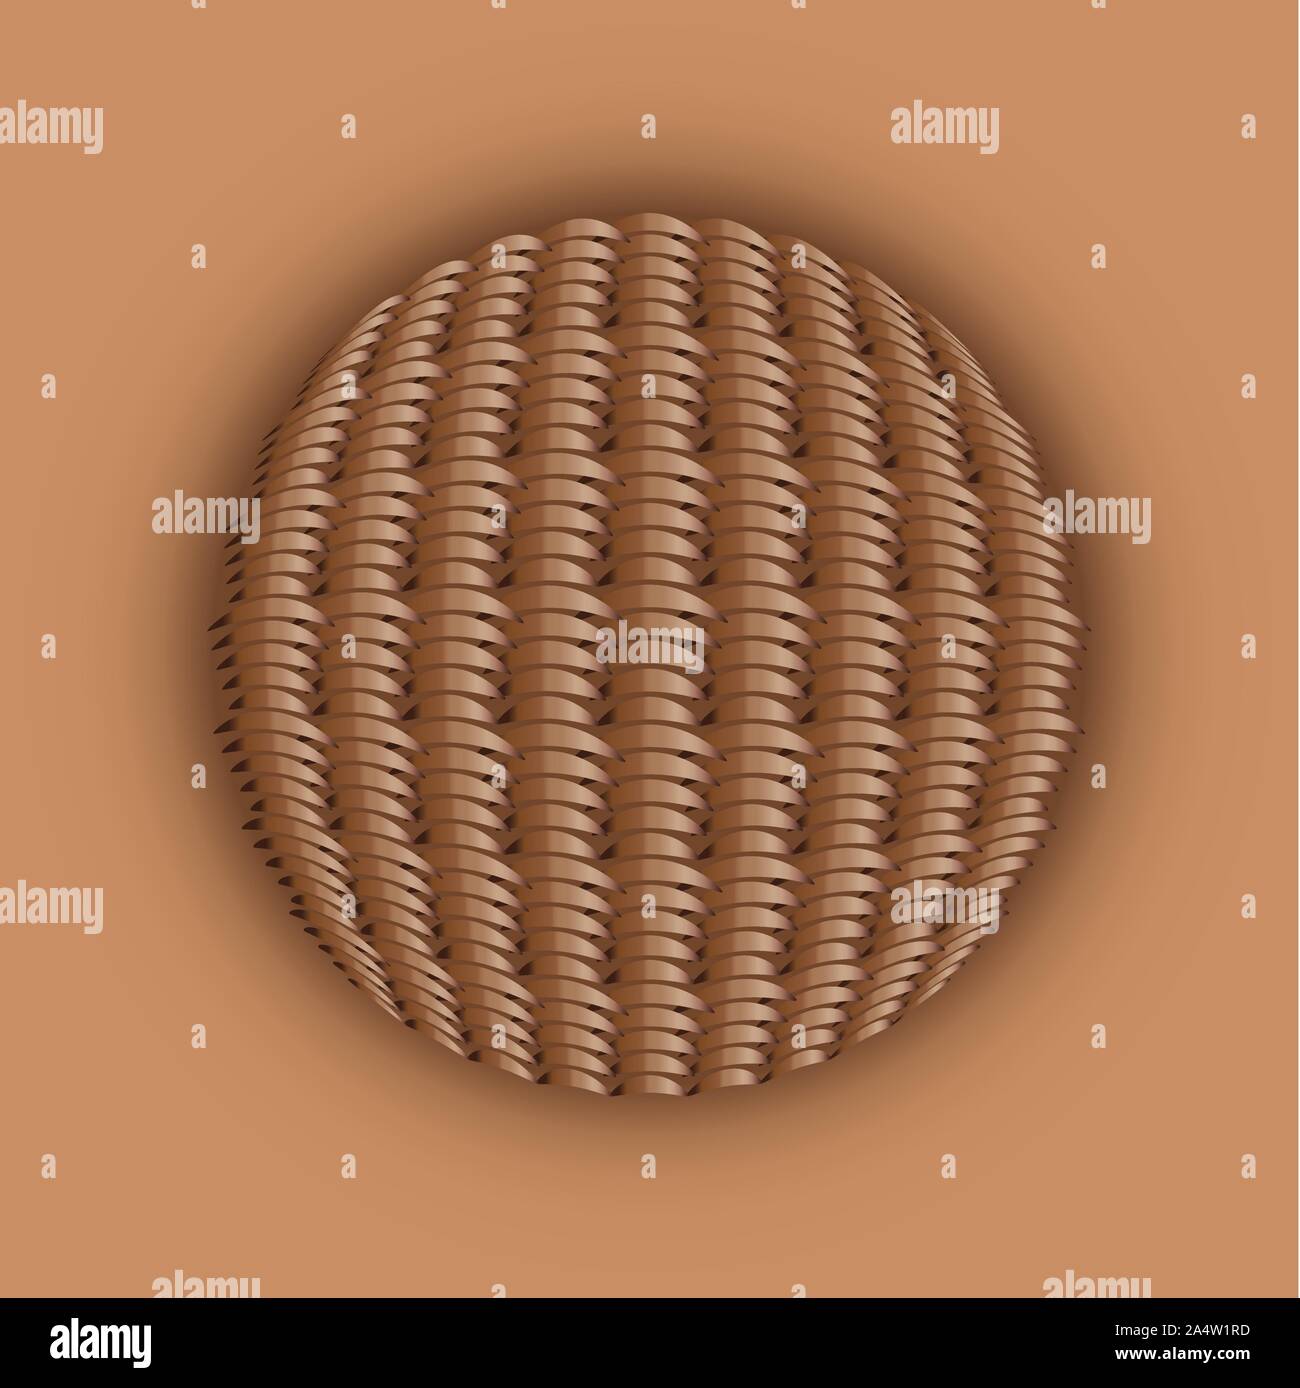 Illustration of wooden weaved ball on brown background. Stock Vector